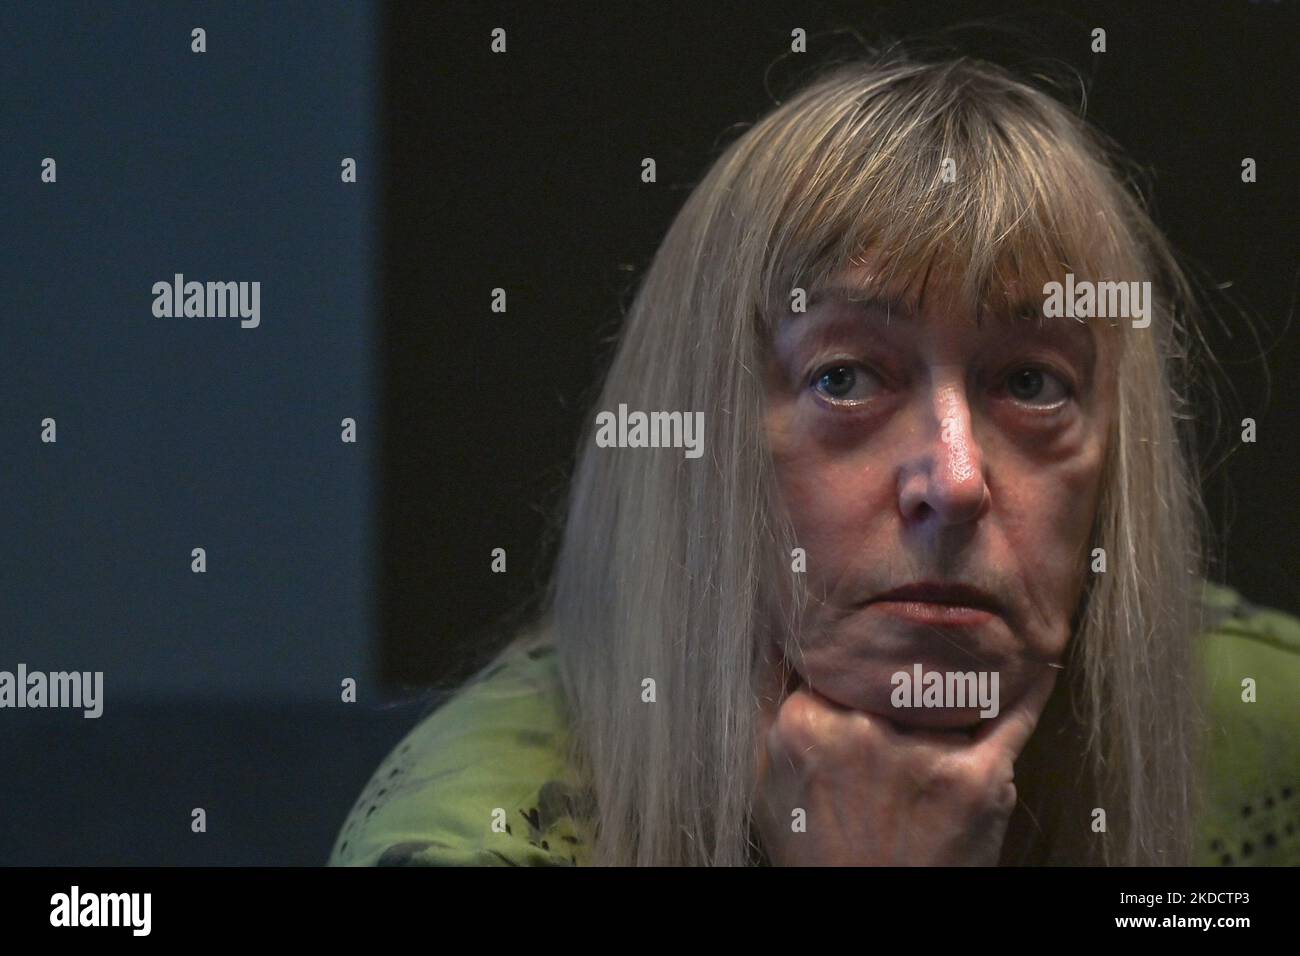 Jody Williams, an American Nobel laureate, pictured in Hotel Bristol, Rzeszow. Three Nobel Peace Prize winners, Tawakkol Karman (Yemen), Leymah Gbowee (Liberia) and Jody Williams (USA), completed today their visit to Ukraine and Poland, commemorating four months of the Russian invasion of Ukraine. The laureates call for the immediate withdrawal of Russian troops from Ukraine, accountability for Russian war crimes, including against women, and for significant participation by women and women's organizations in humanitarian action, reconstruction and peace-building. On Thursday, June 23, 2022, i Stock Photo